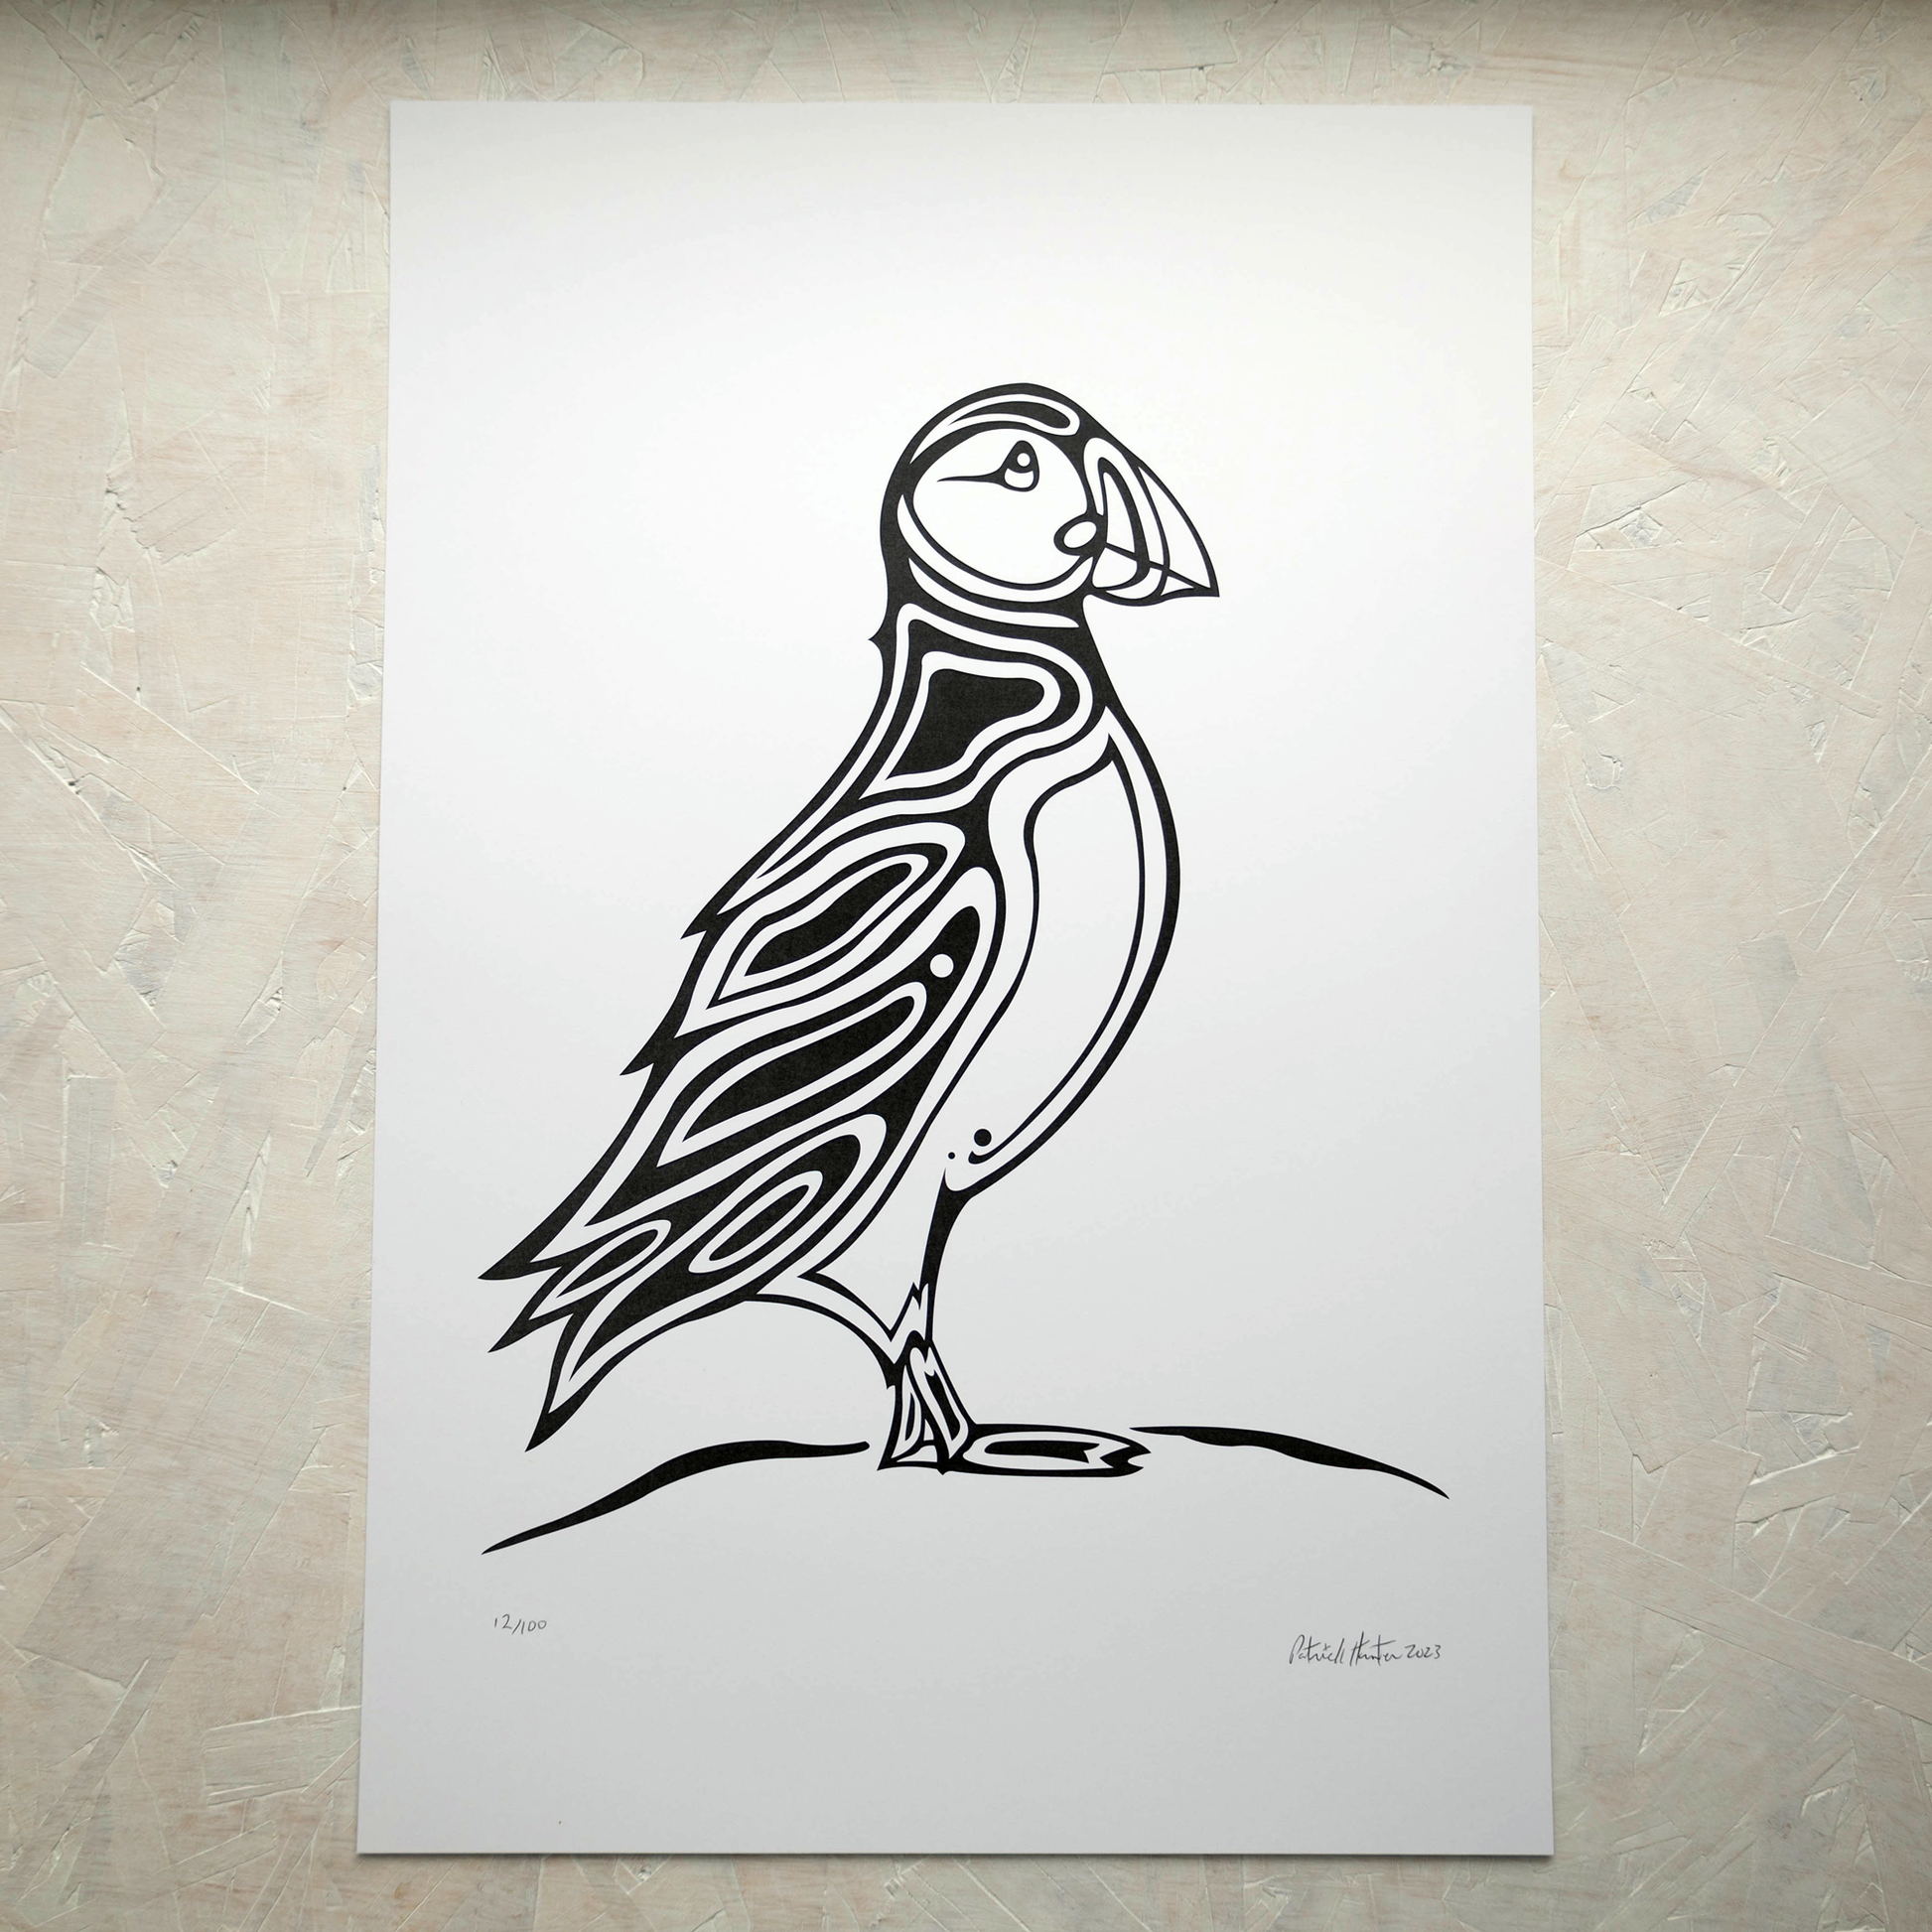 Print of Patrick Hunter's painting of a puffin, black on white, woodland art style.